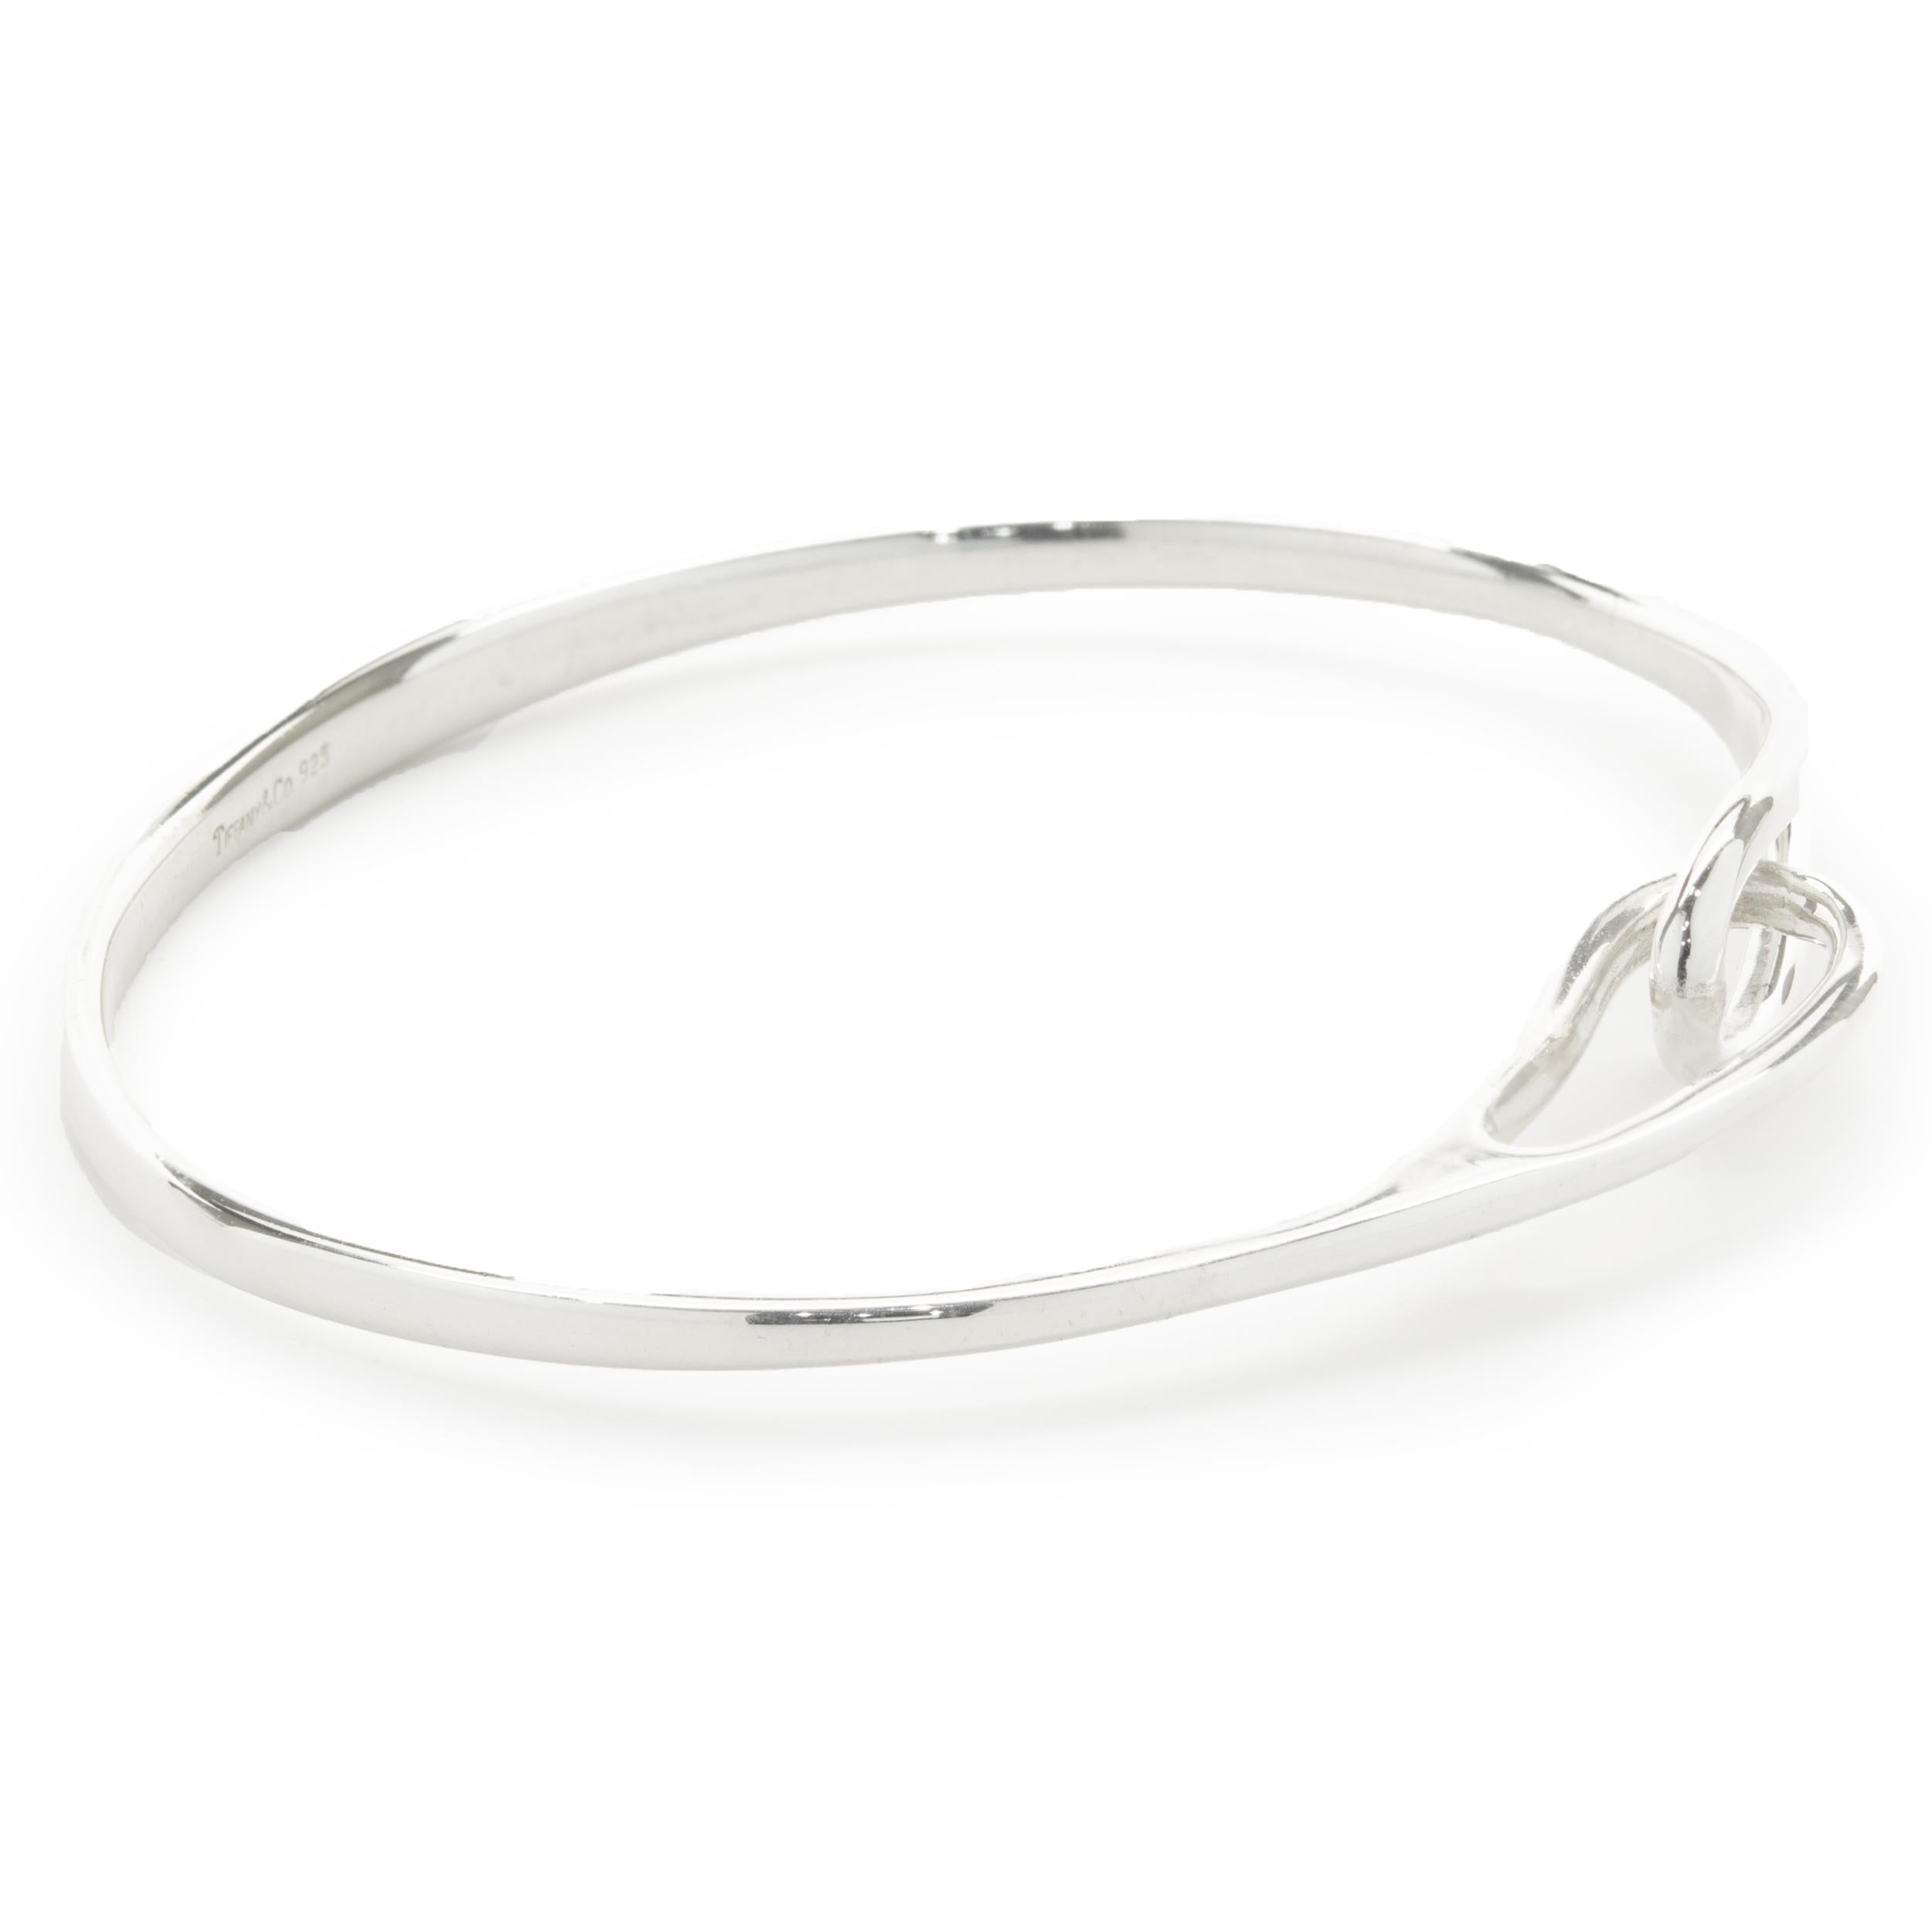 Designer: Tiffany & Co. 
Material: Sterling silver 
Dimensions: bracelet will fit a 7-inch wrist
Weight: 12.80 grams
